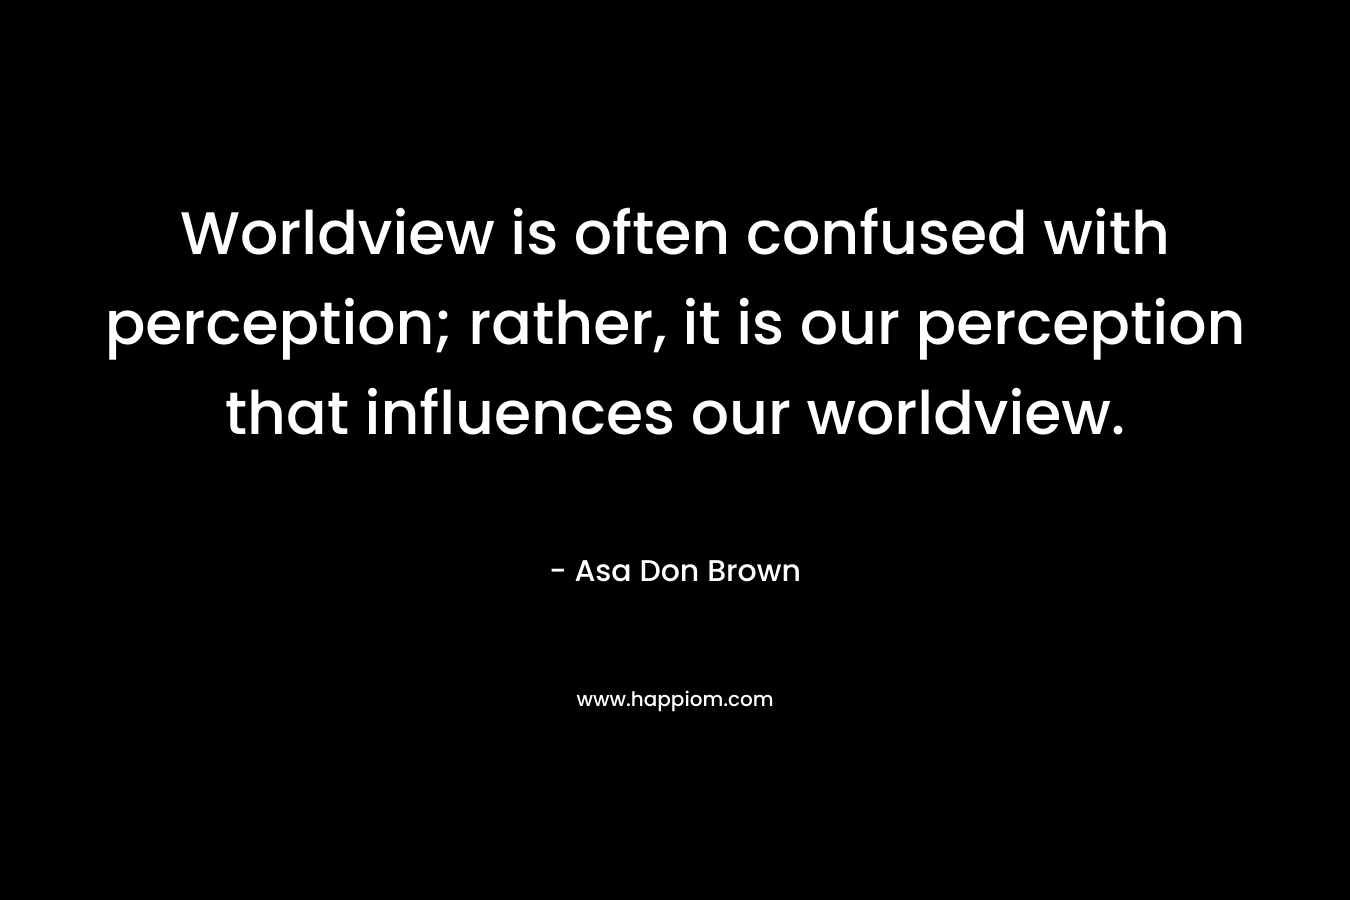 Worldview is often confused with perception; rather, it is our perception that influences our worldview.